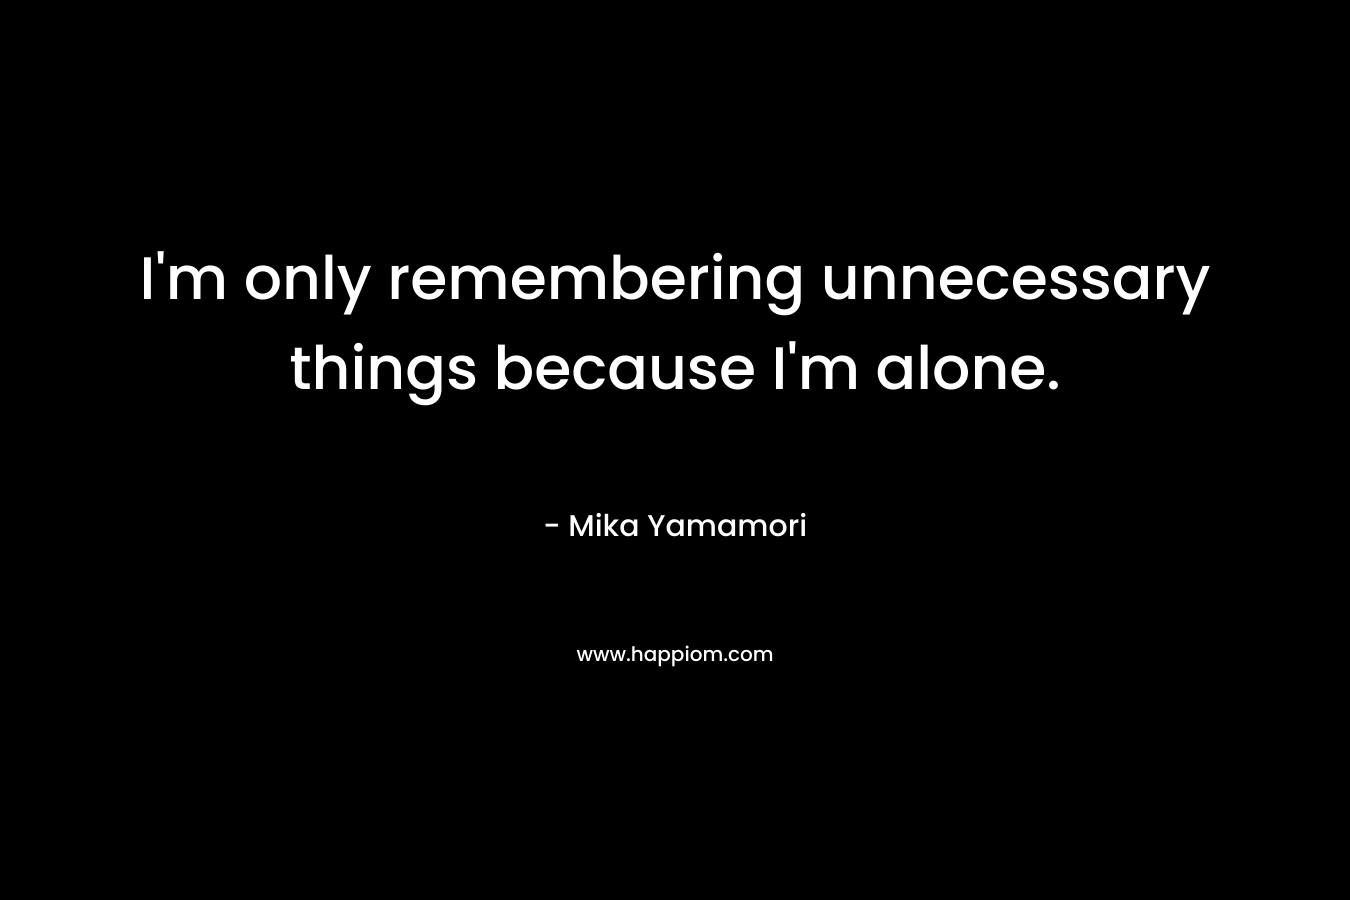 I'm only remembering unnecessary things because I'm alone.